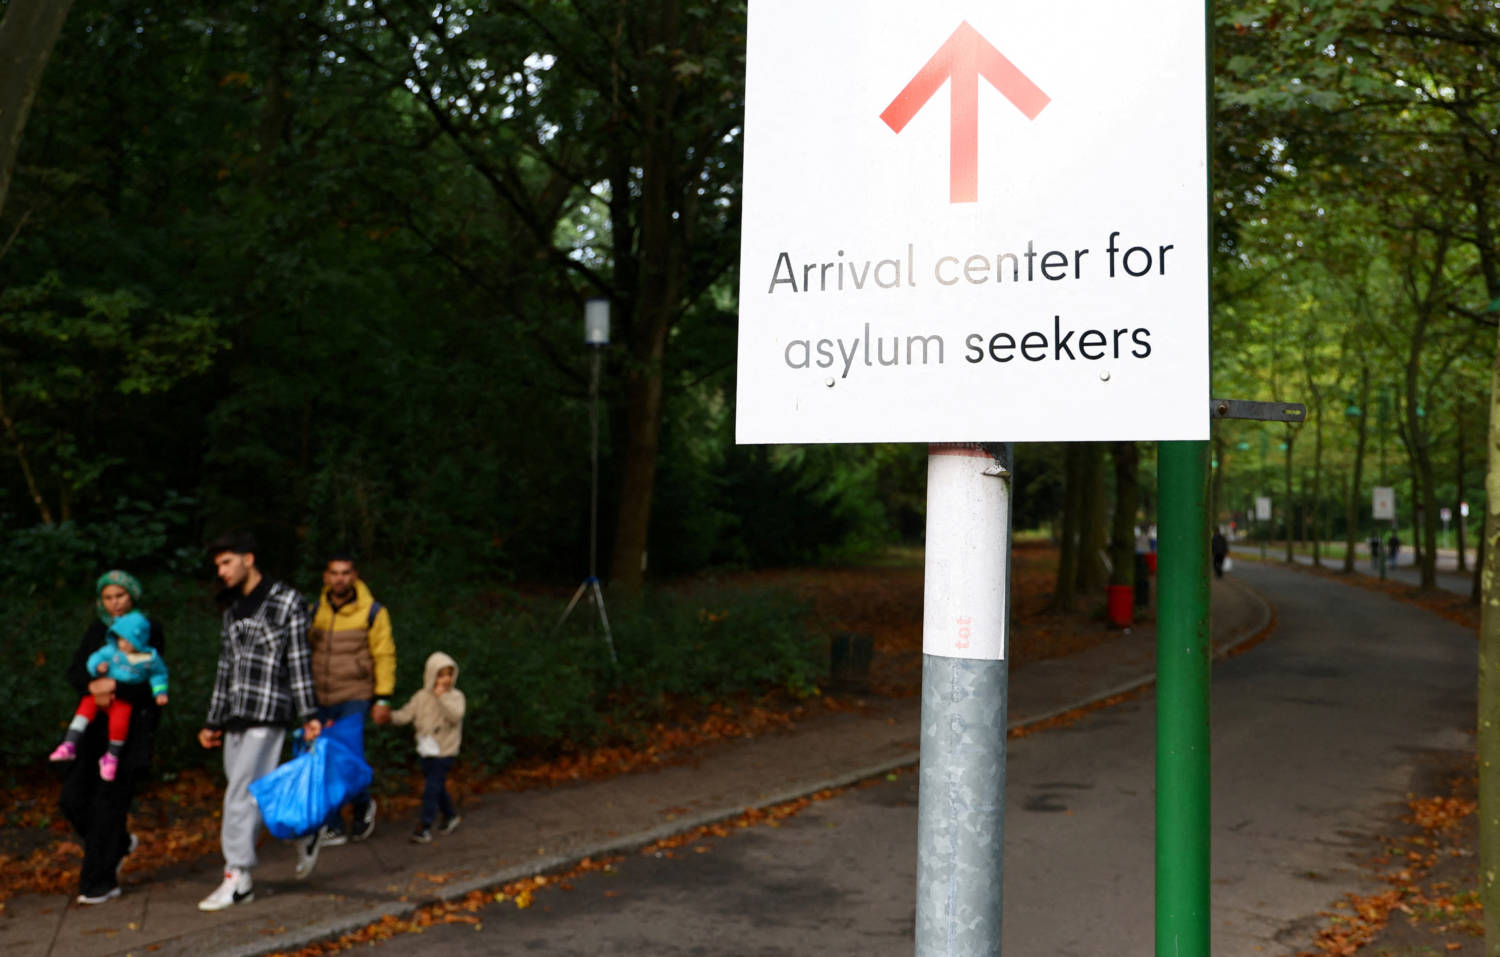 File Photo: Migrants Are Pictured At The Arrival Center For Asylum Seekers At Berlin's Reinickendorf District